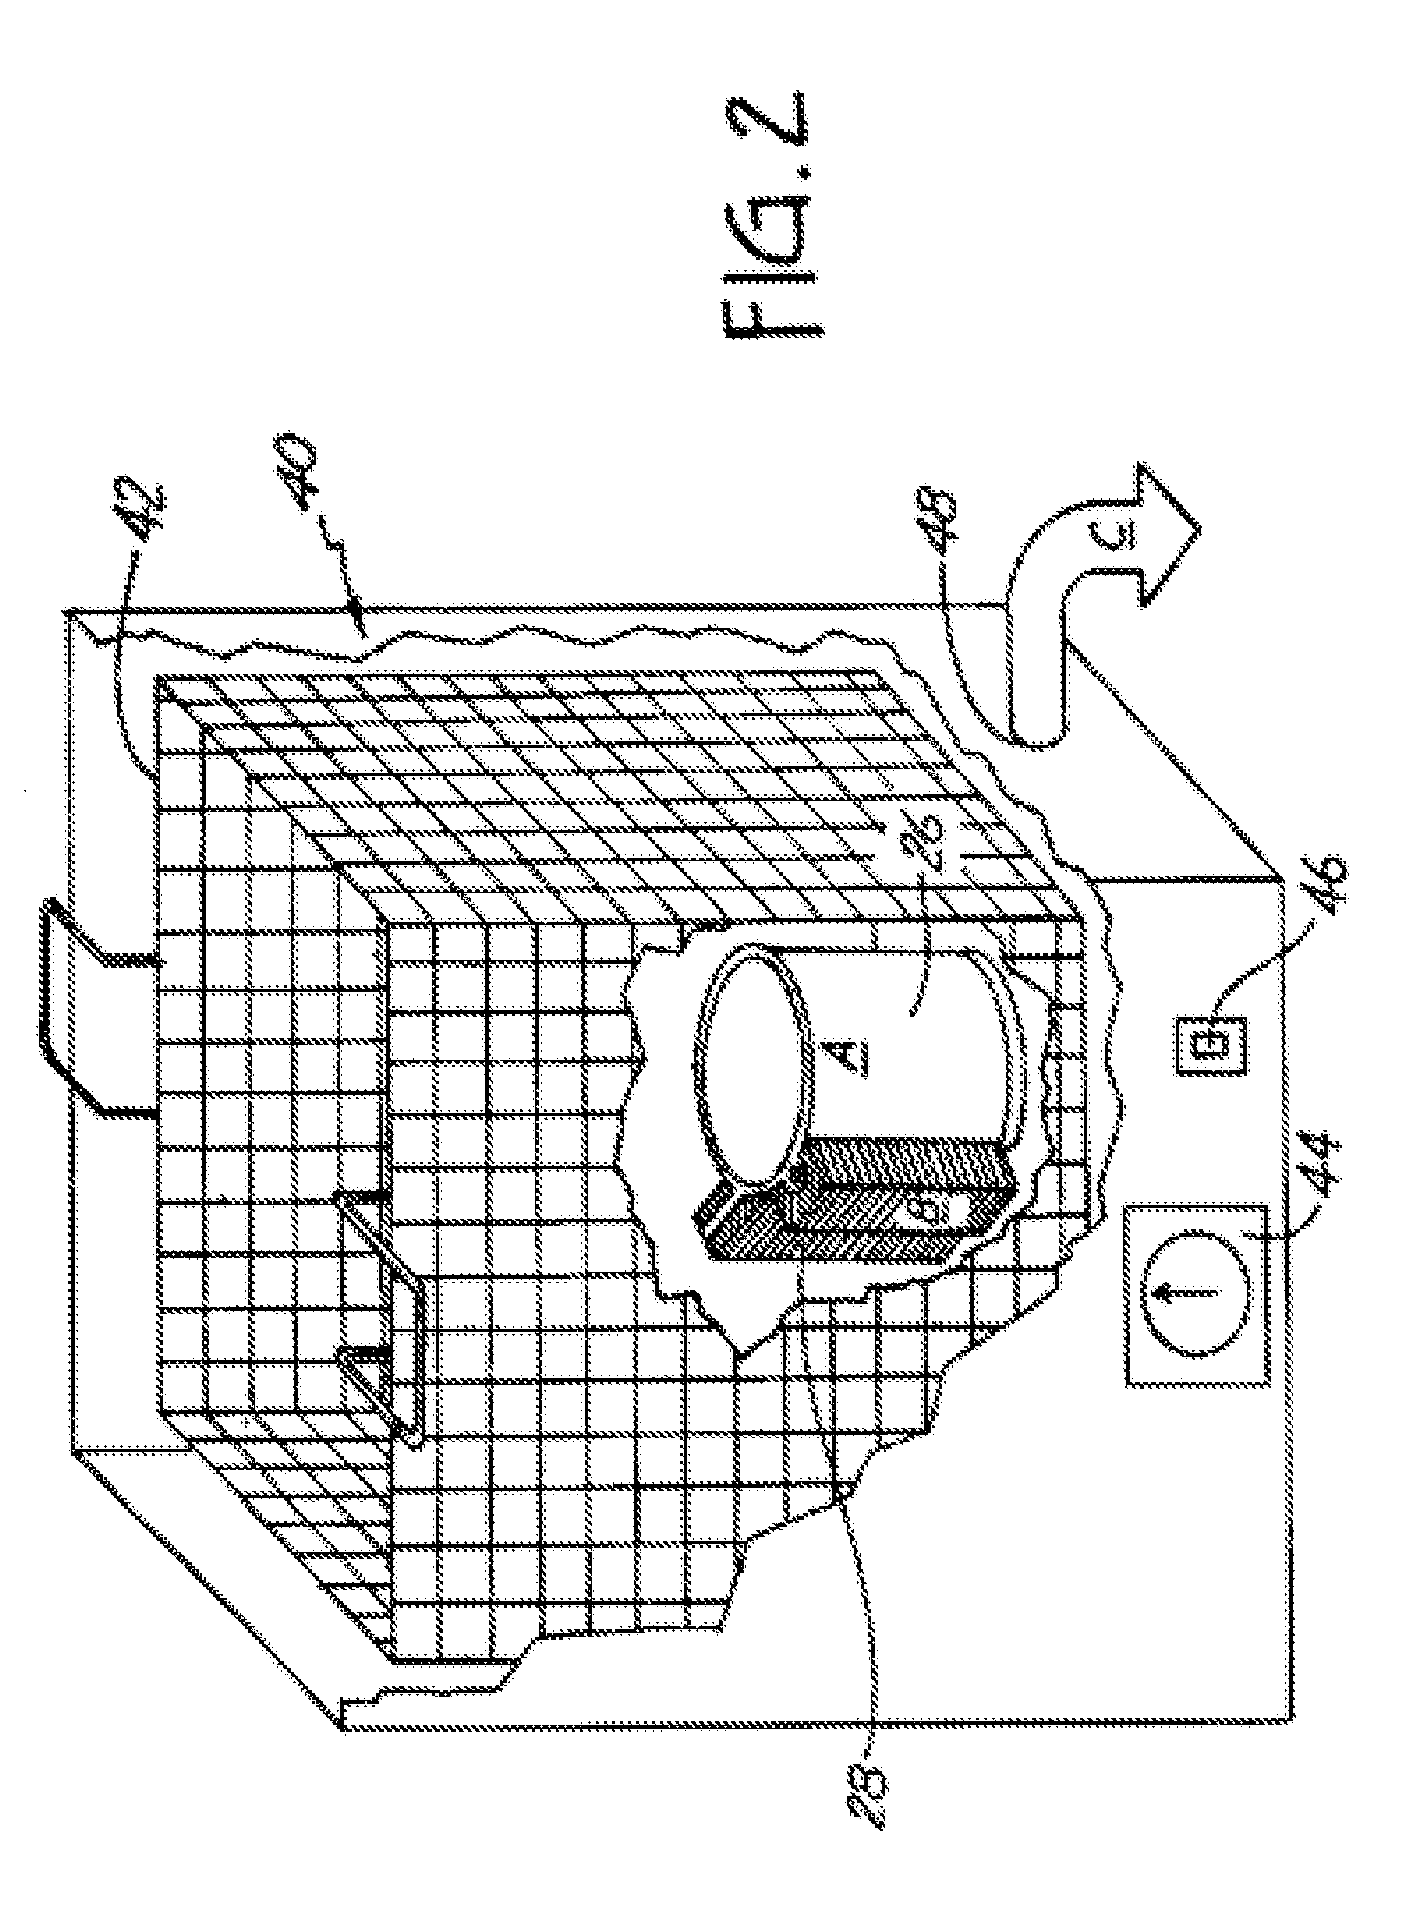 Use and provision of an amorphous vinyl alcohol polymer for forming a structure